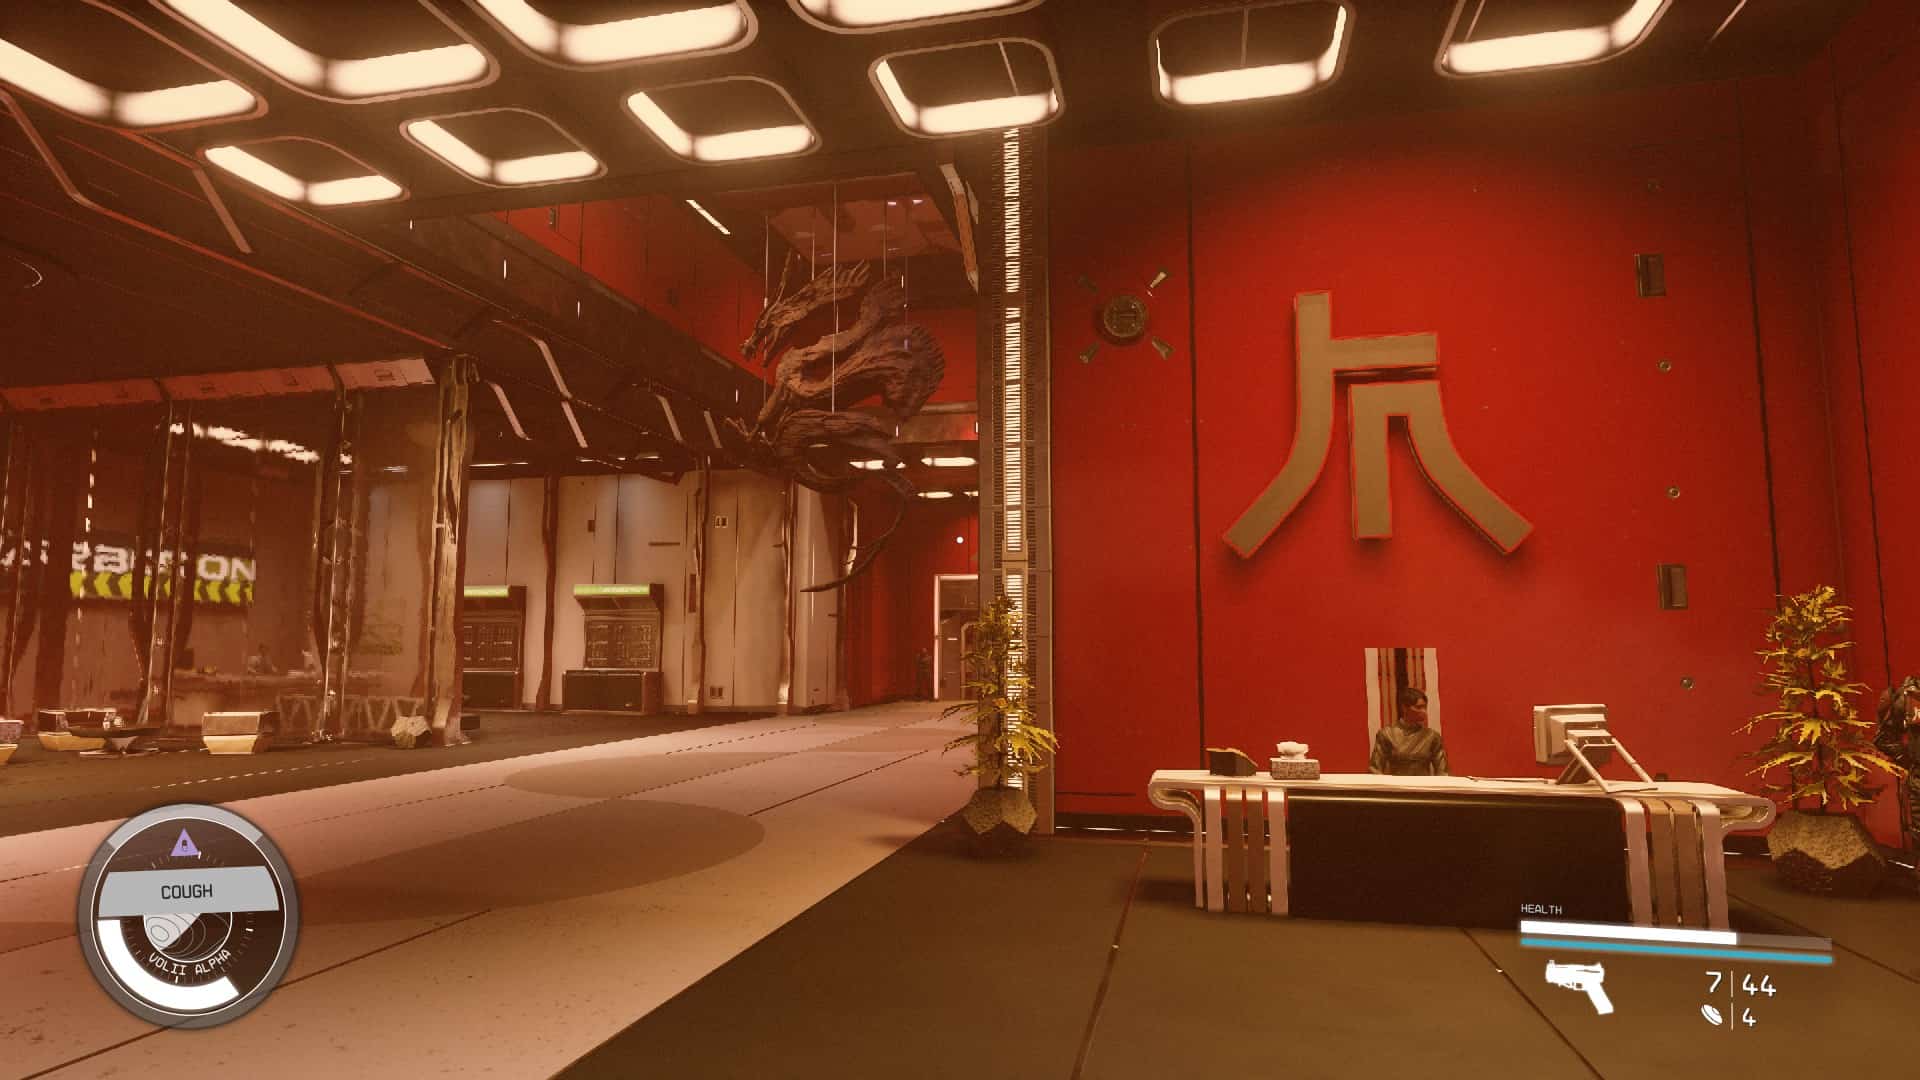 A screenshot of a room in a video game featuring the Starfield Ryujin Industries questline.